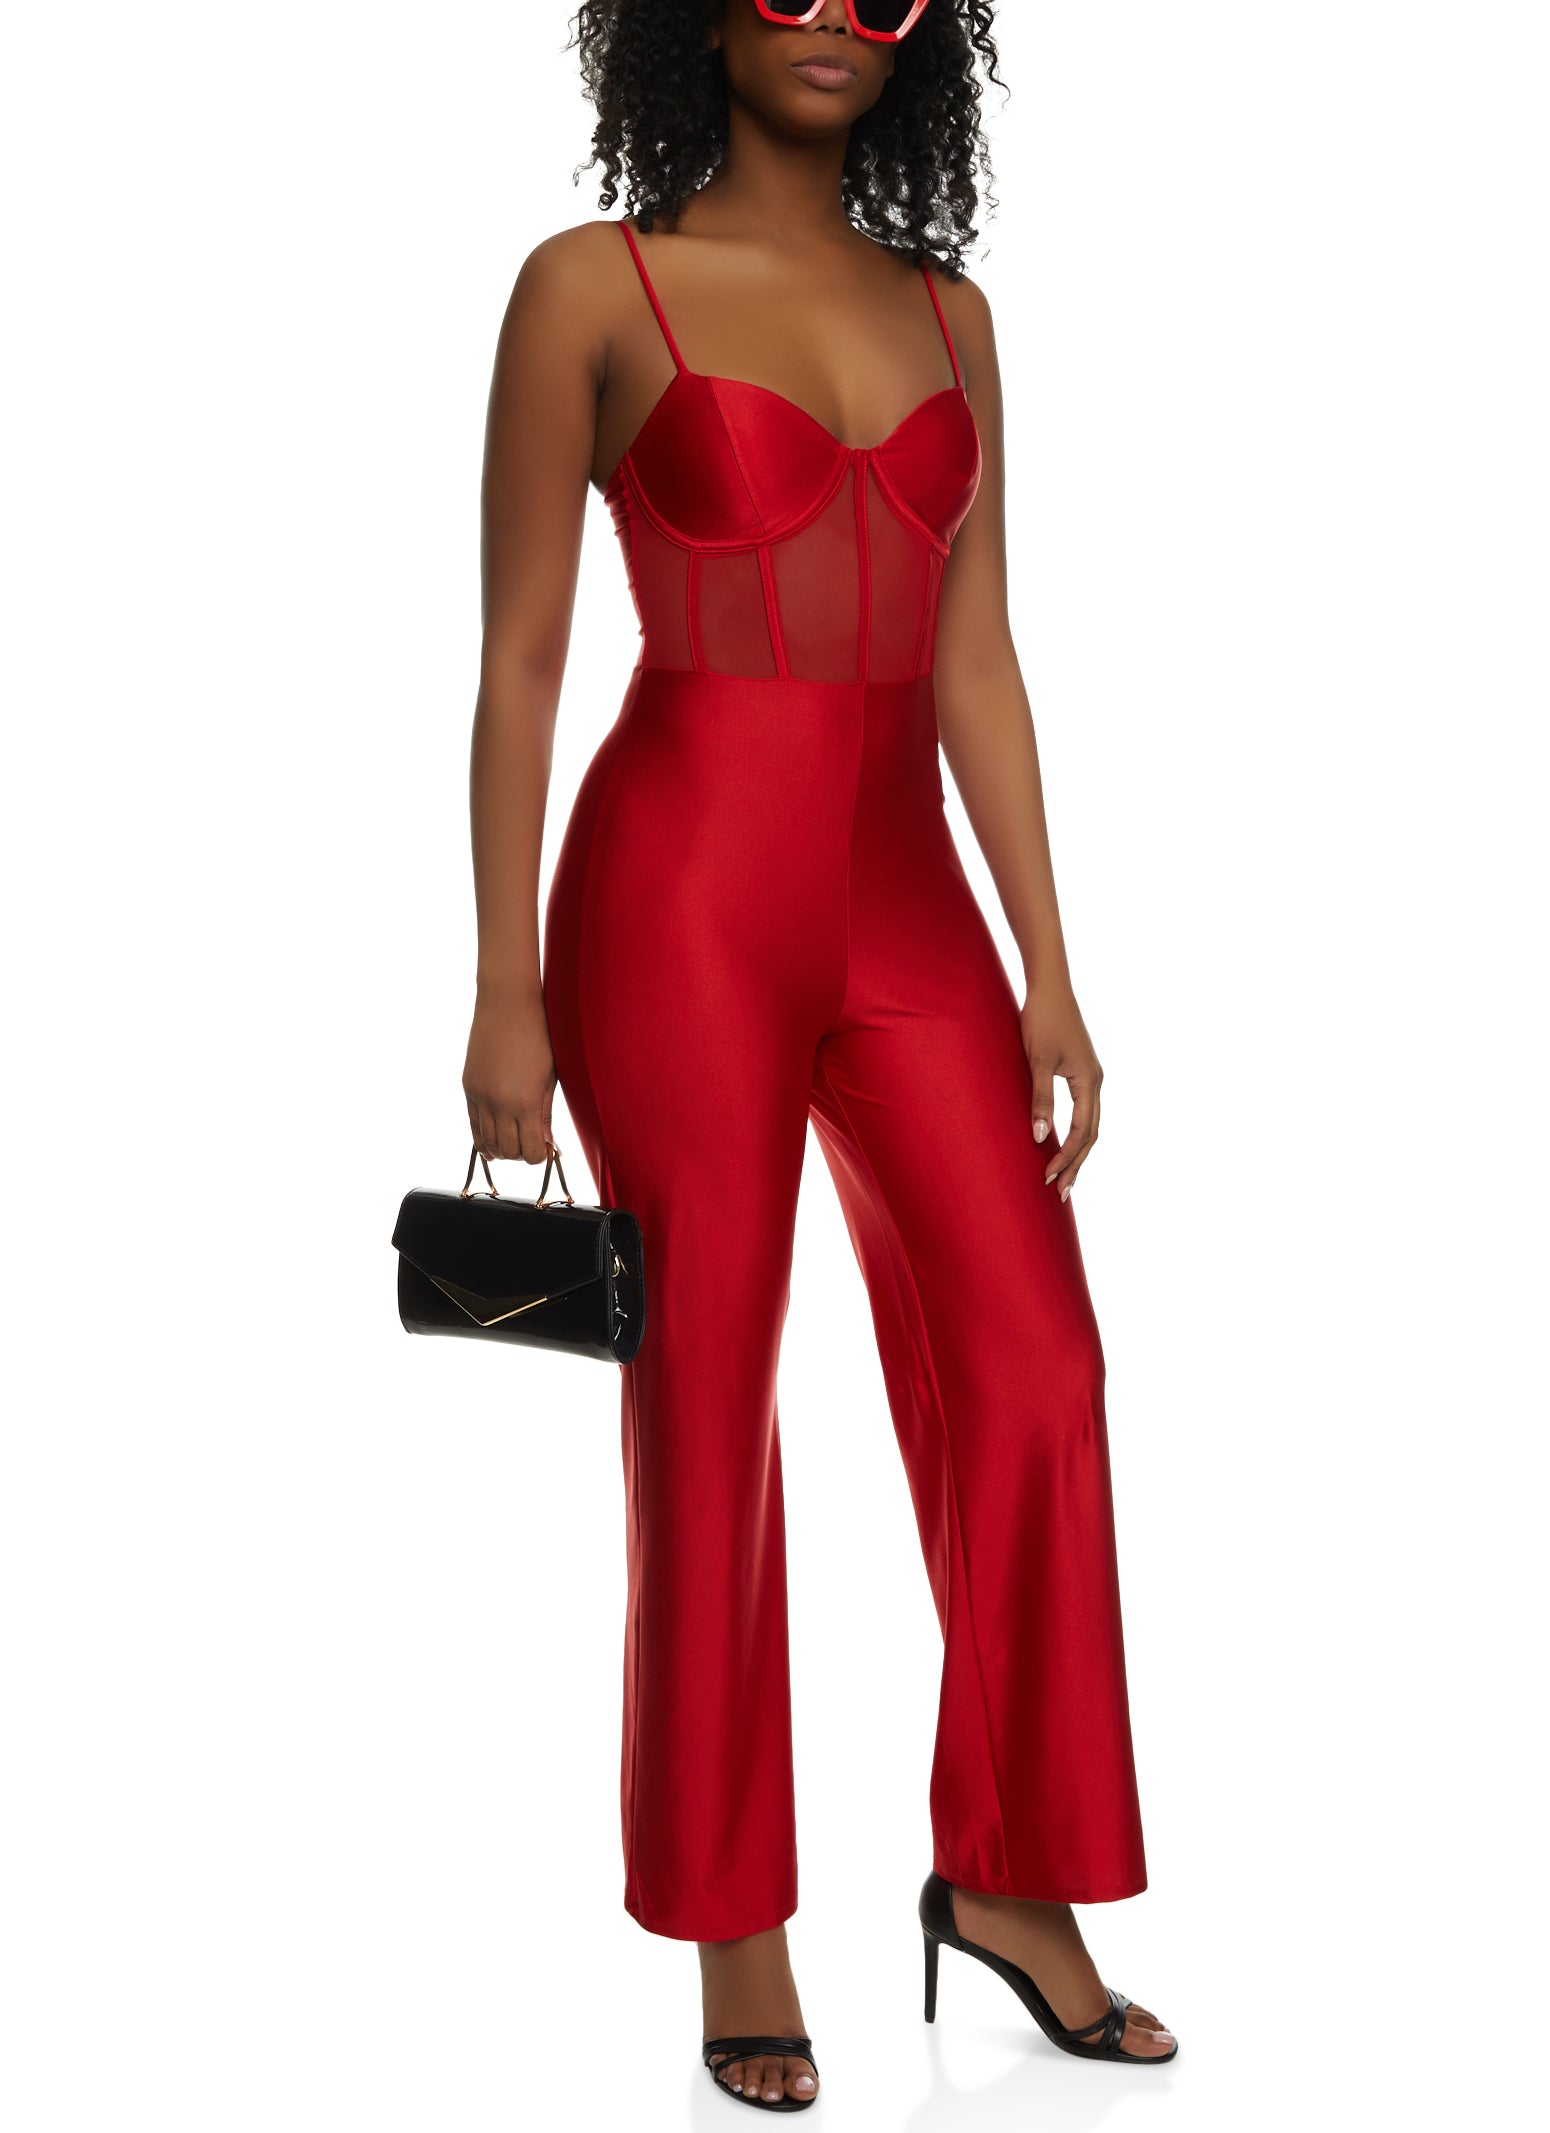 Womens Red Jumpsuits, Everyday Low Prices